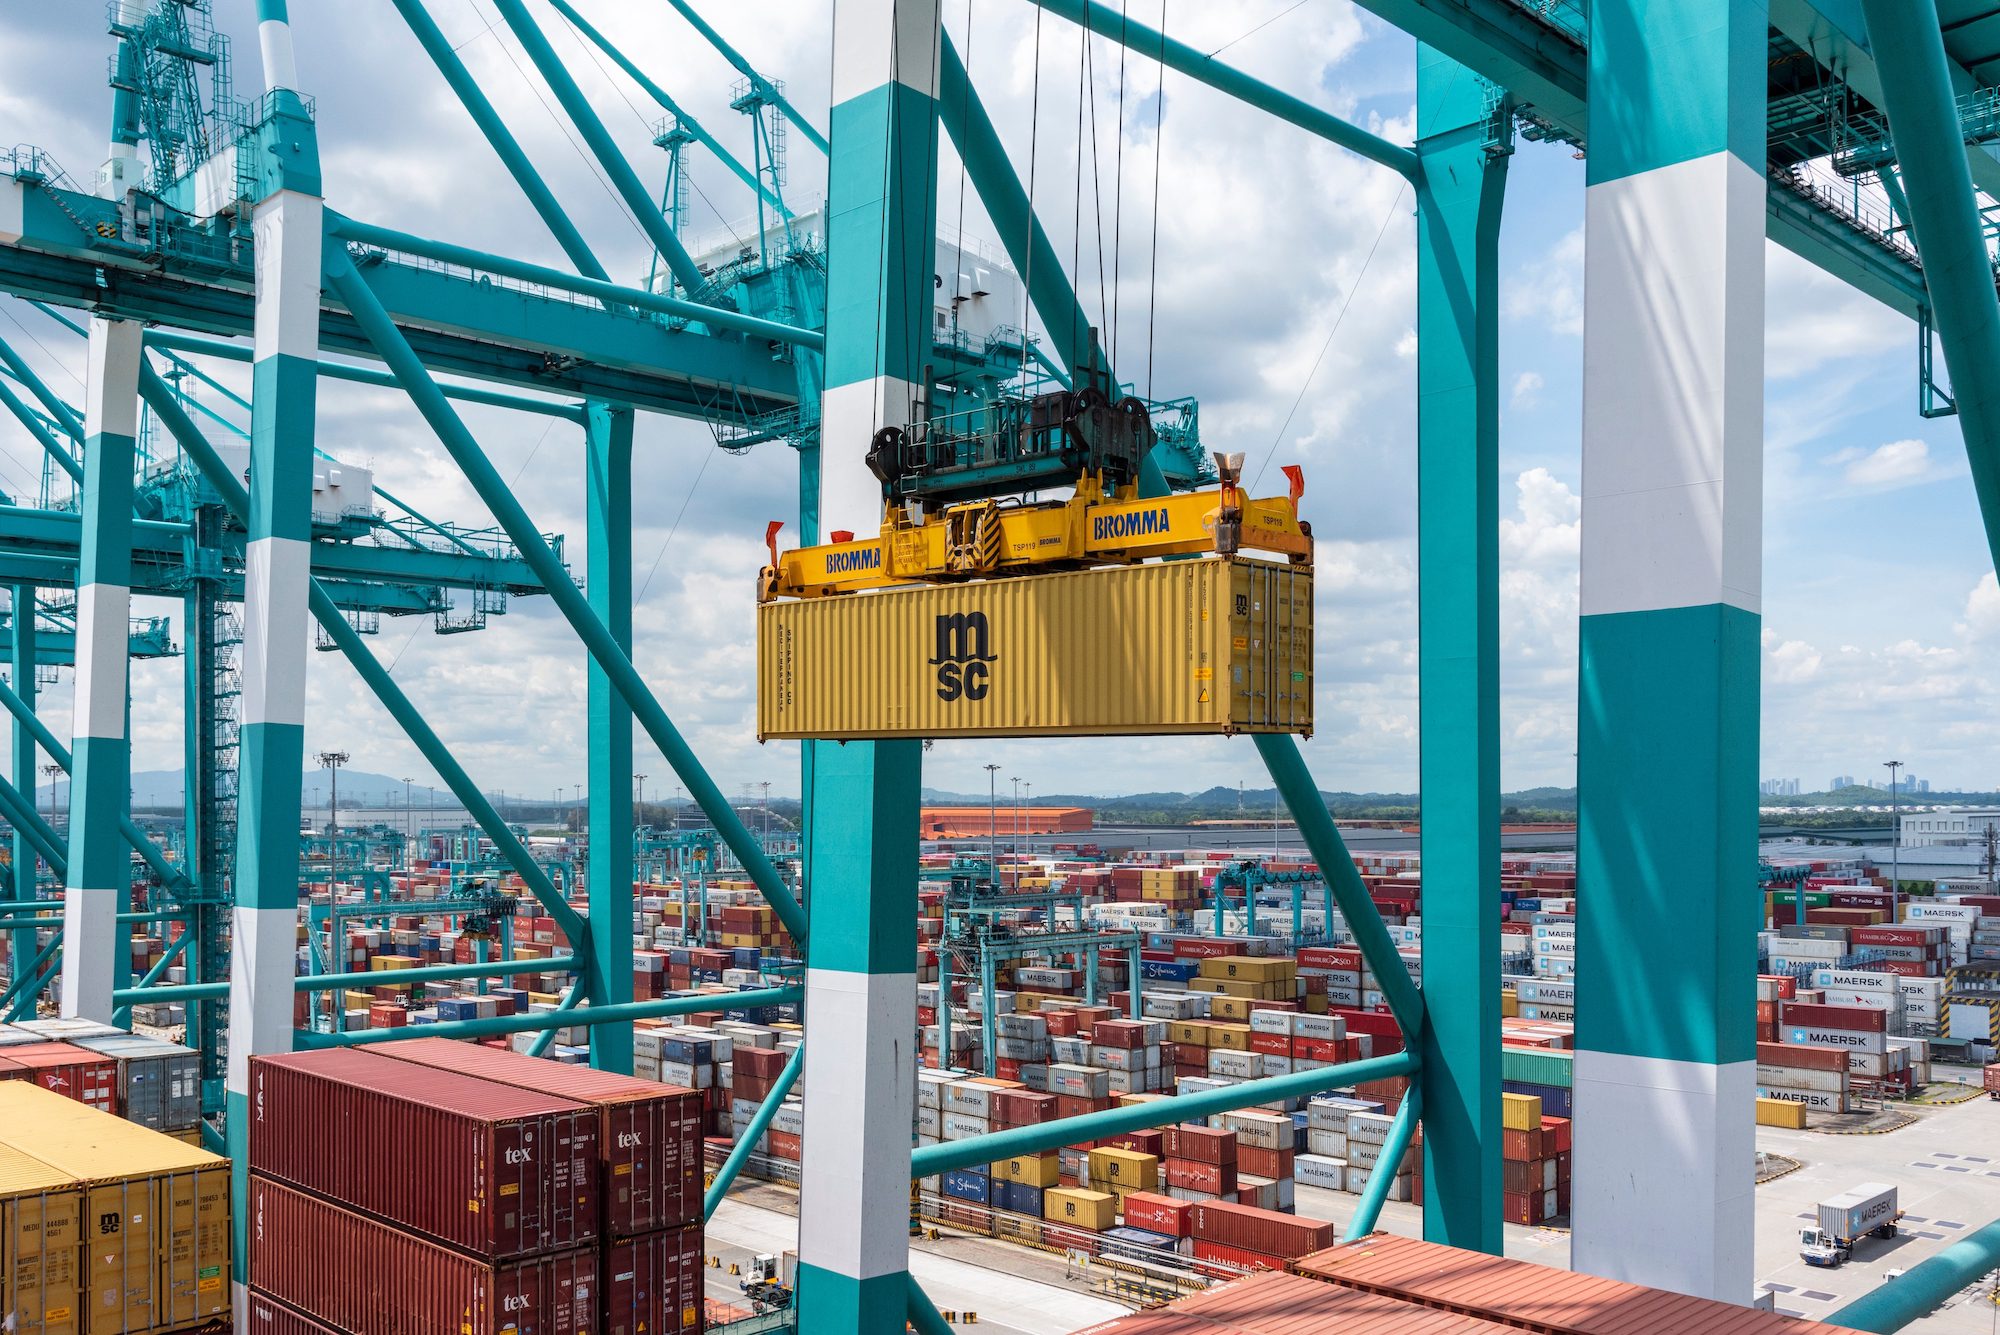 Stock photo shows a MSC shipping container being lifted onto a ship